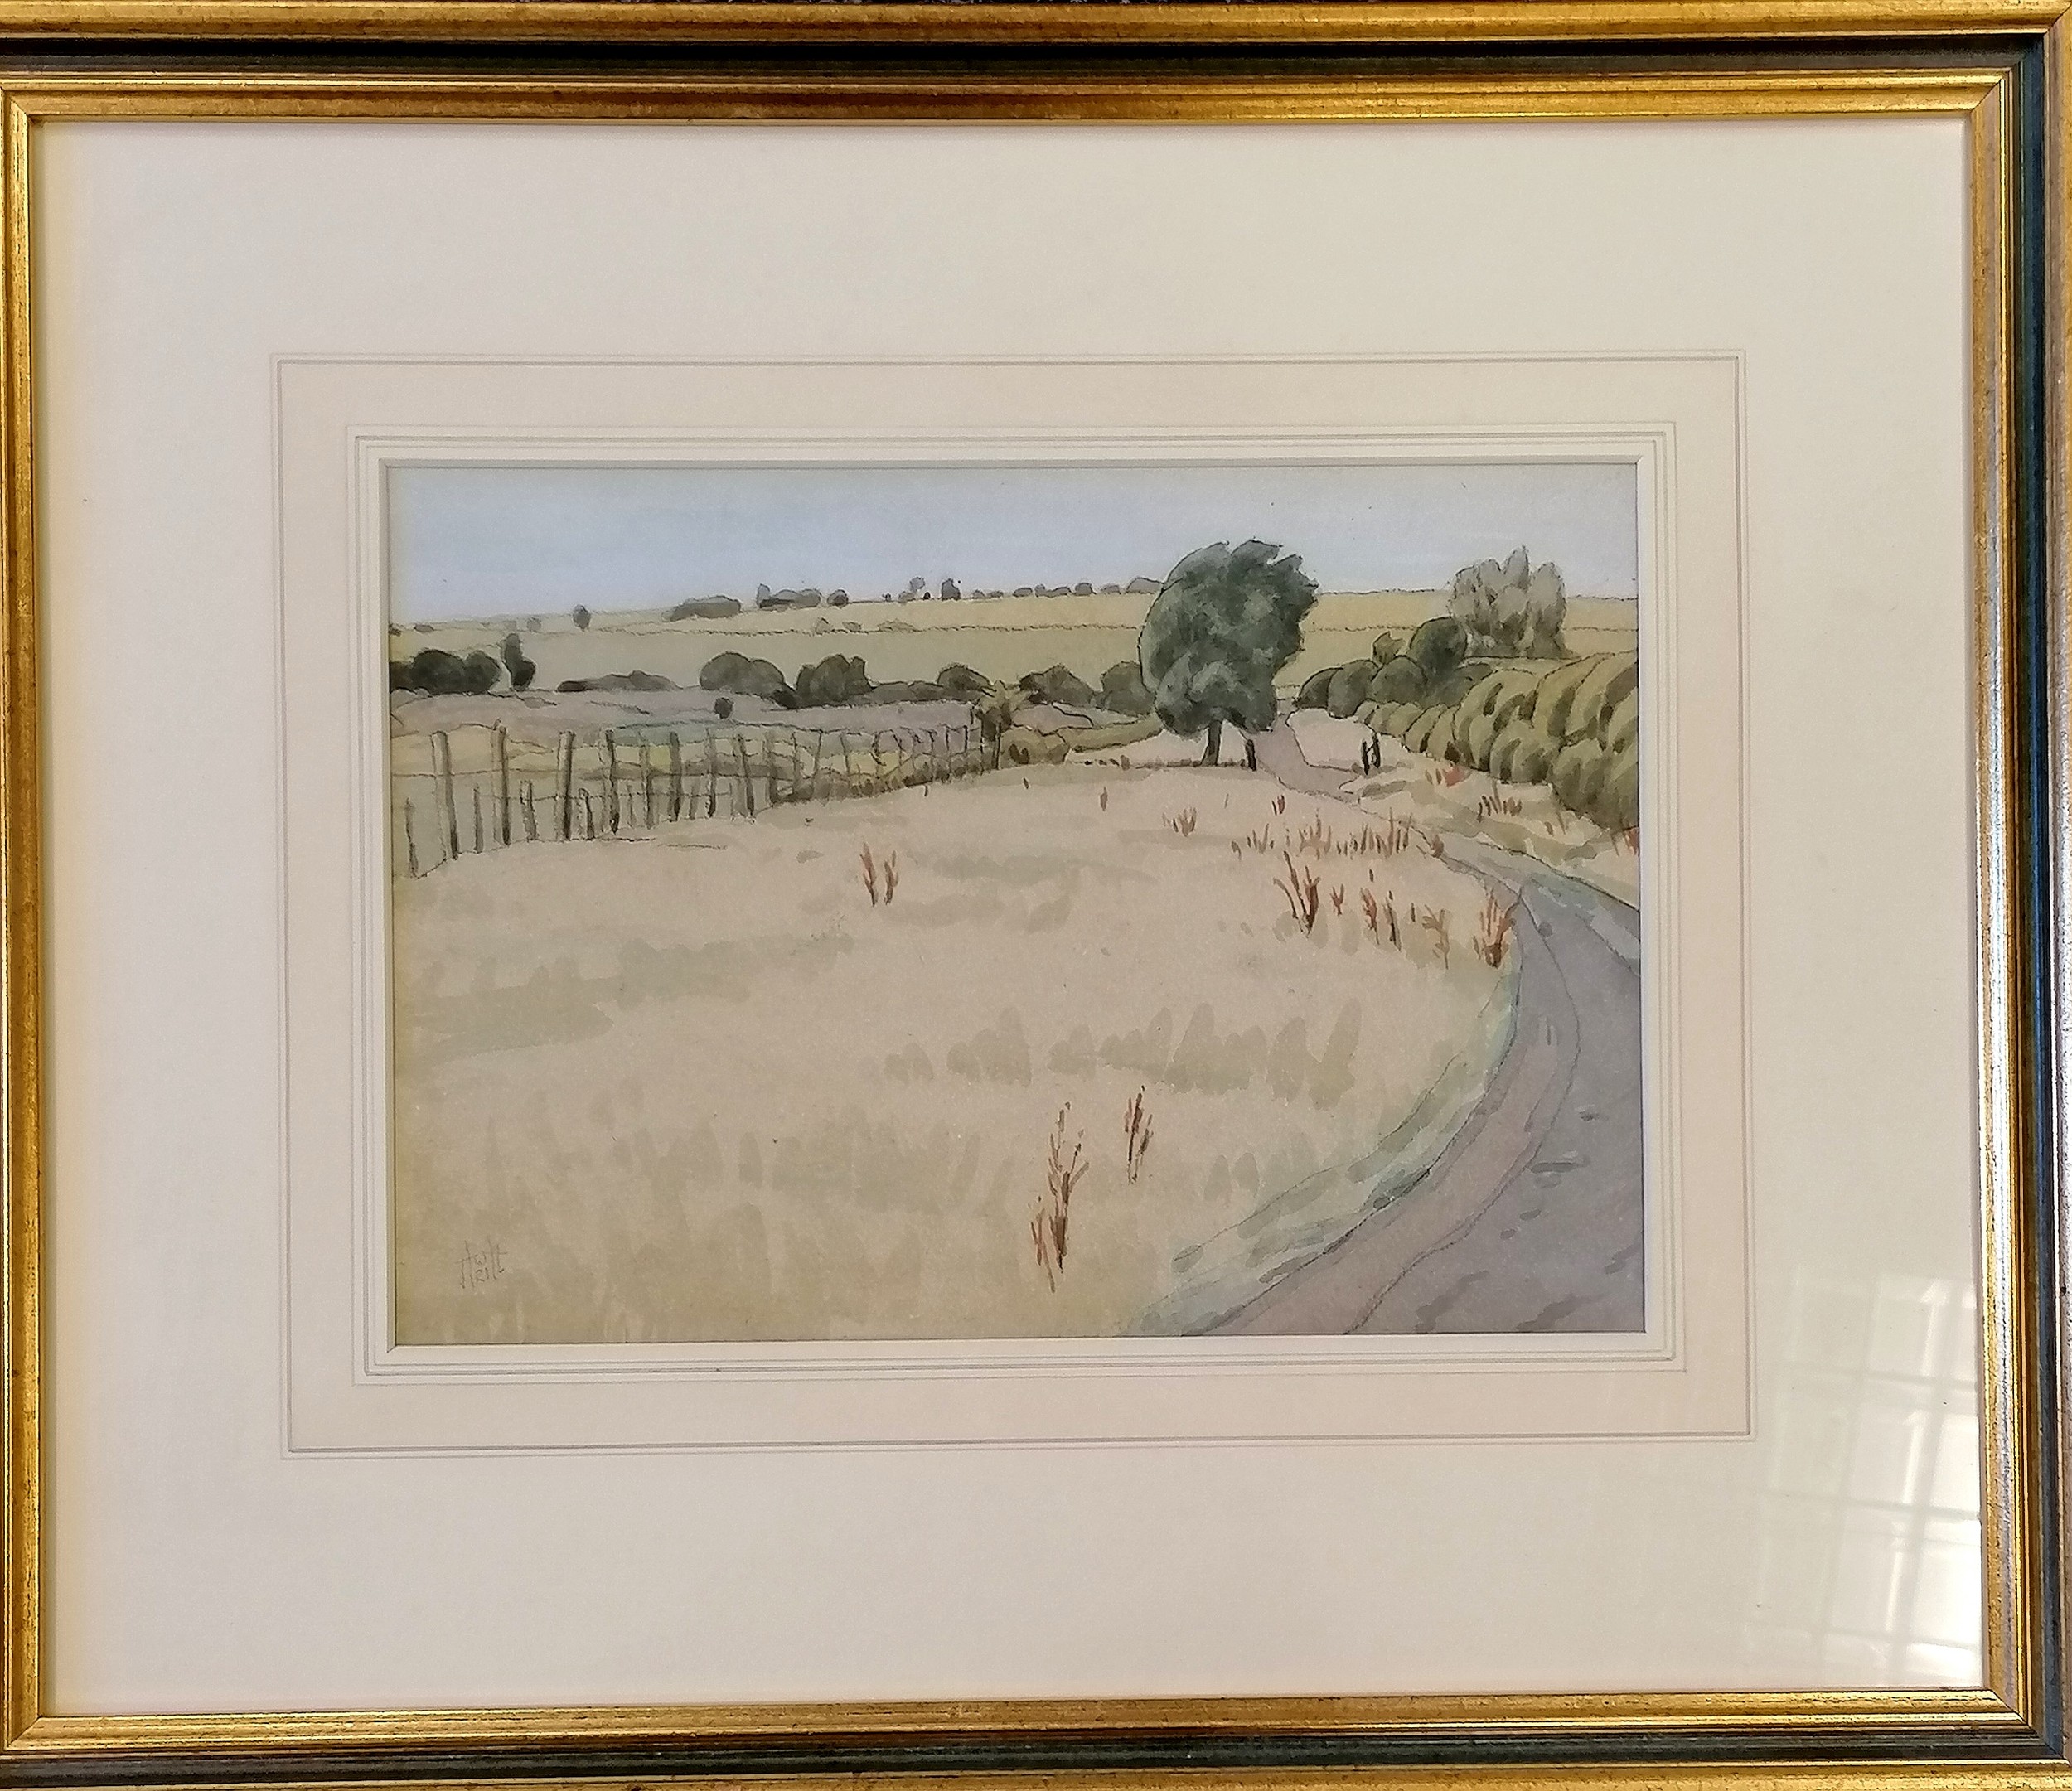 1921 watercolour painting of a rural scene with HWH (?) monogram - frame 45cm x 54cm - Image 3 of 3